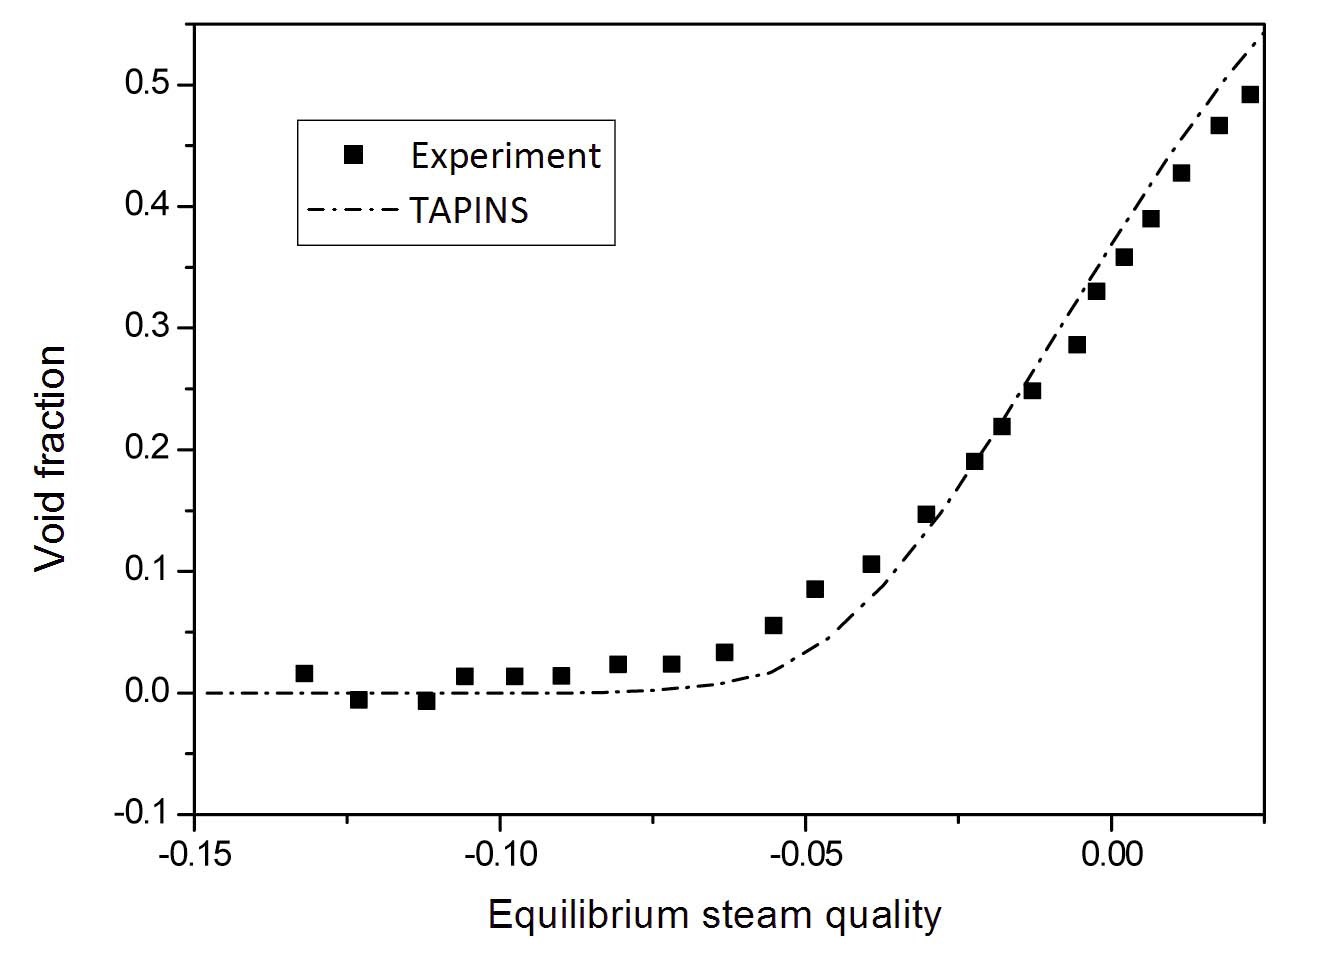 Comparison of TAPINS with Bartolomey Test at 30.1 bar